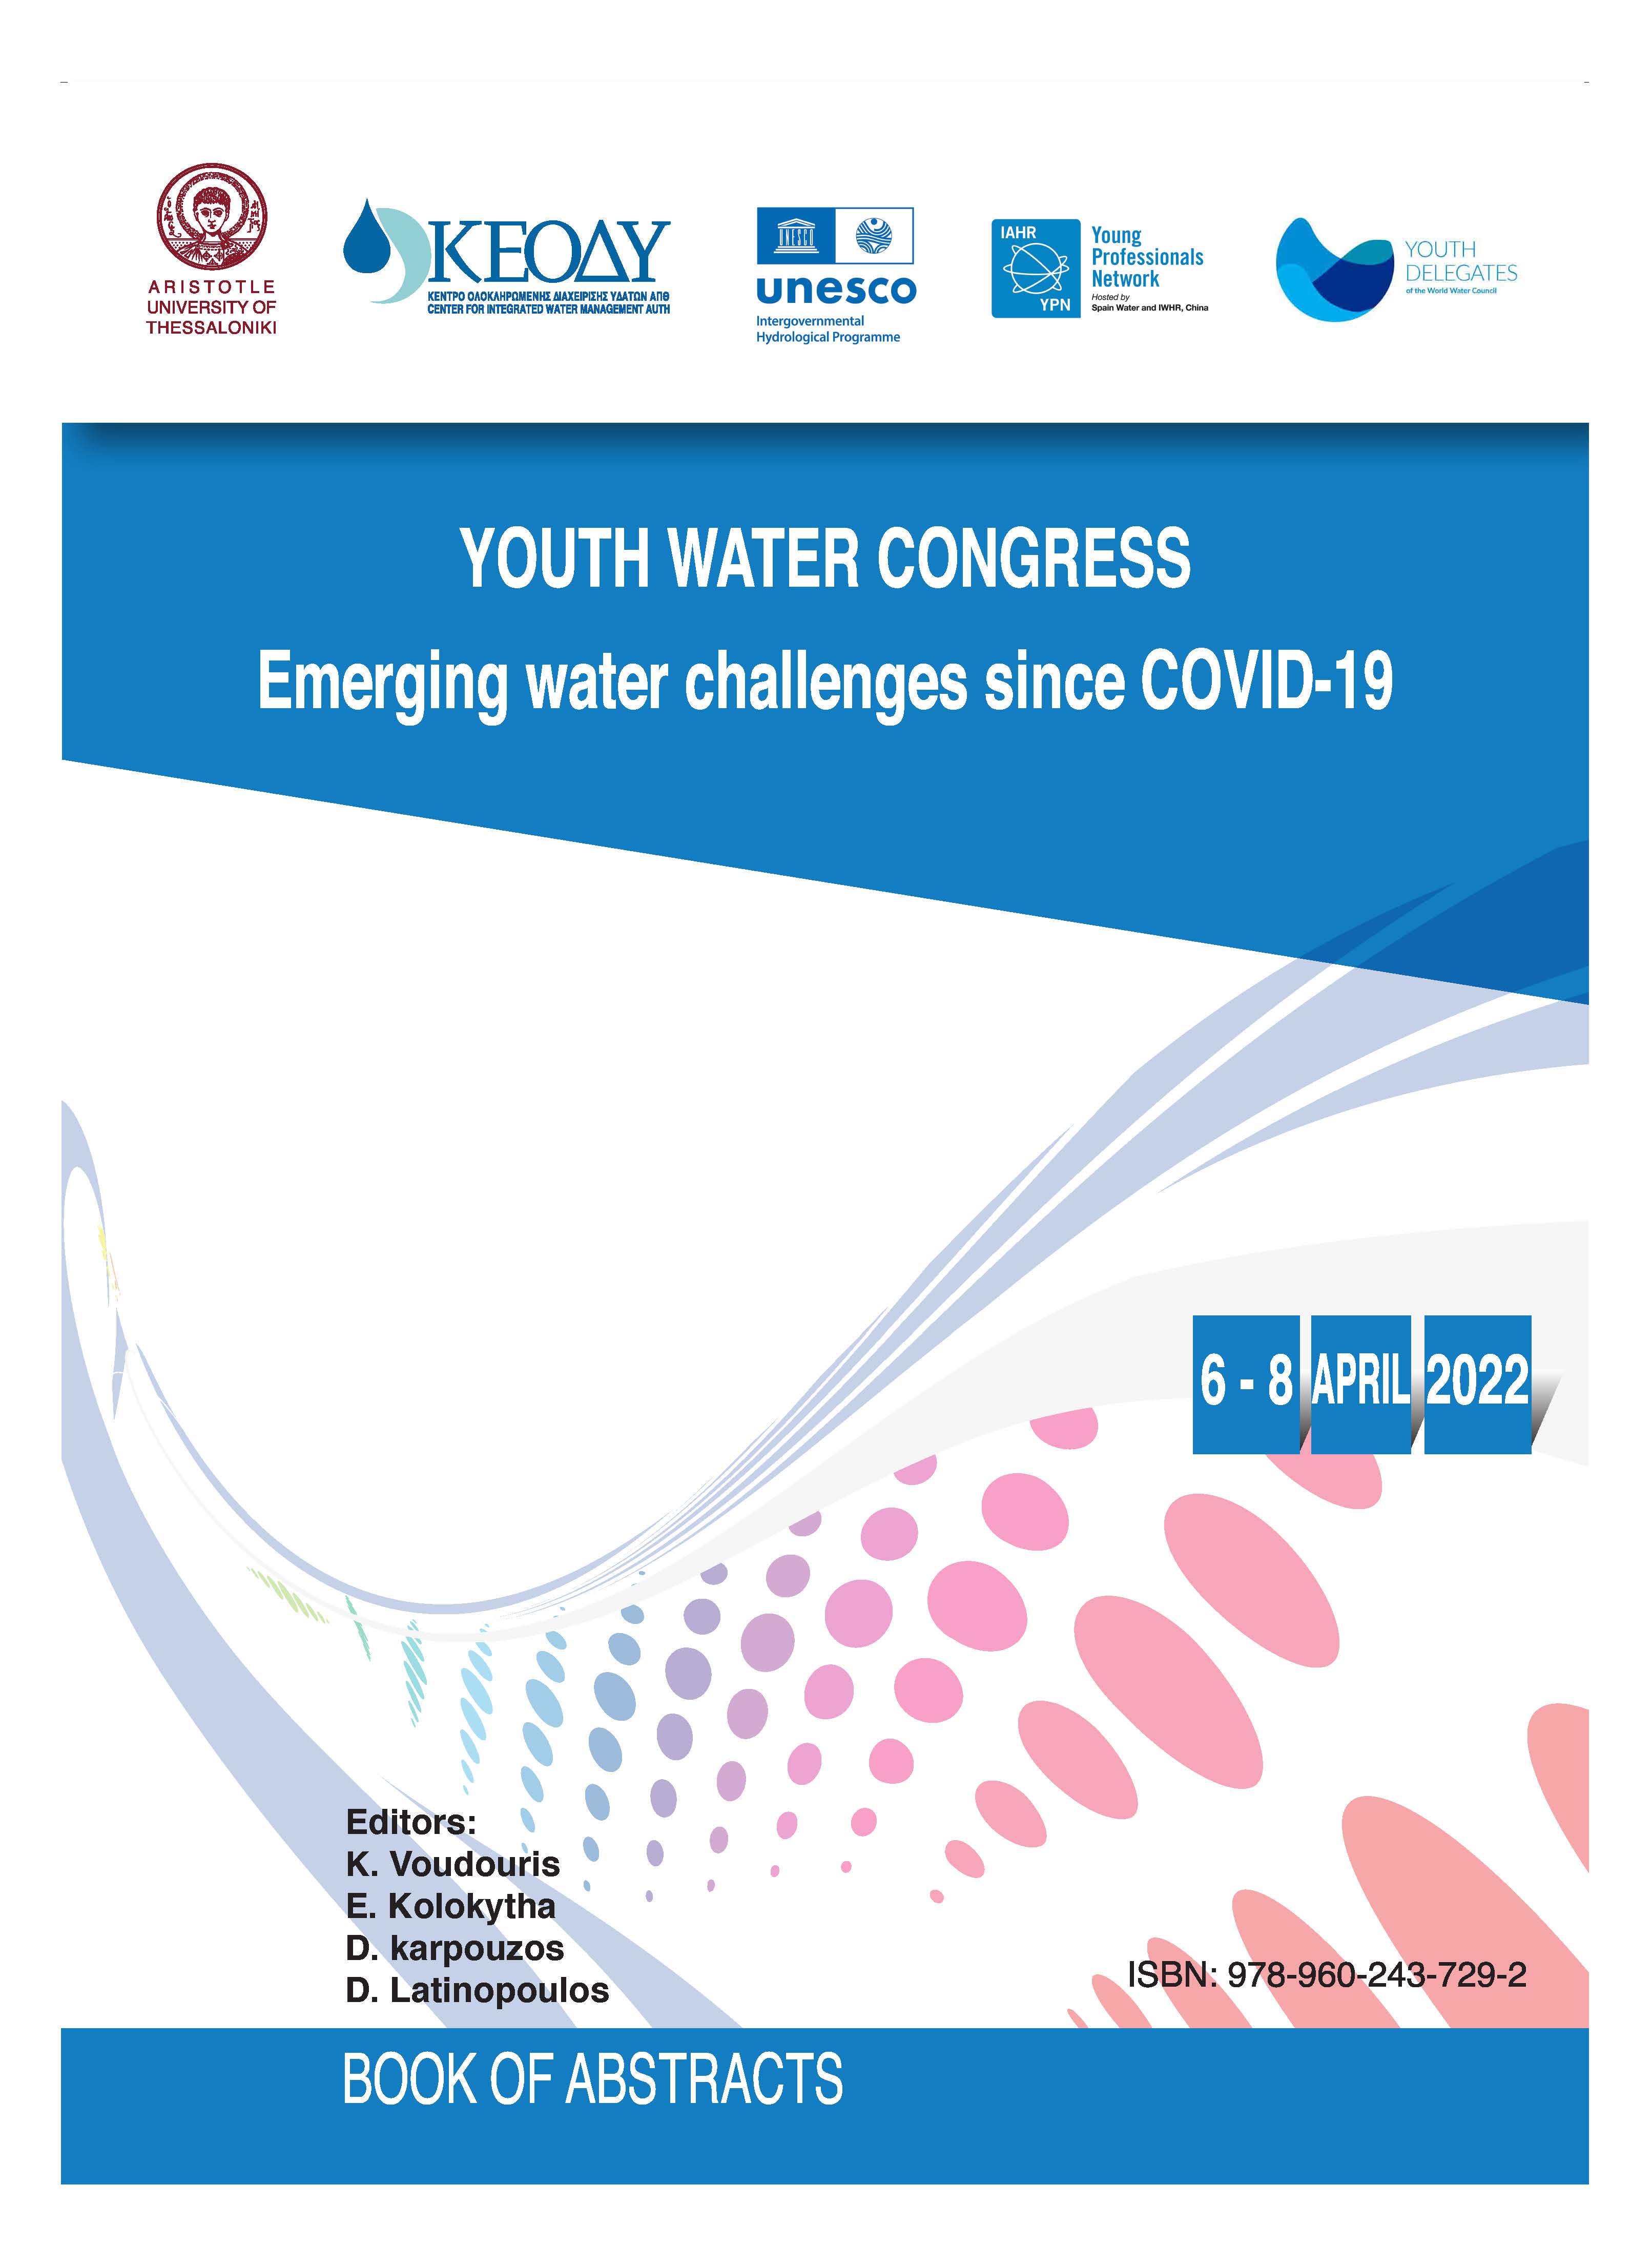 Proceedings of the Online Youth Water Congress